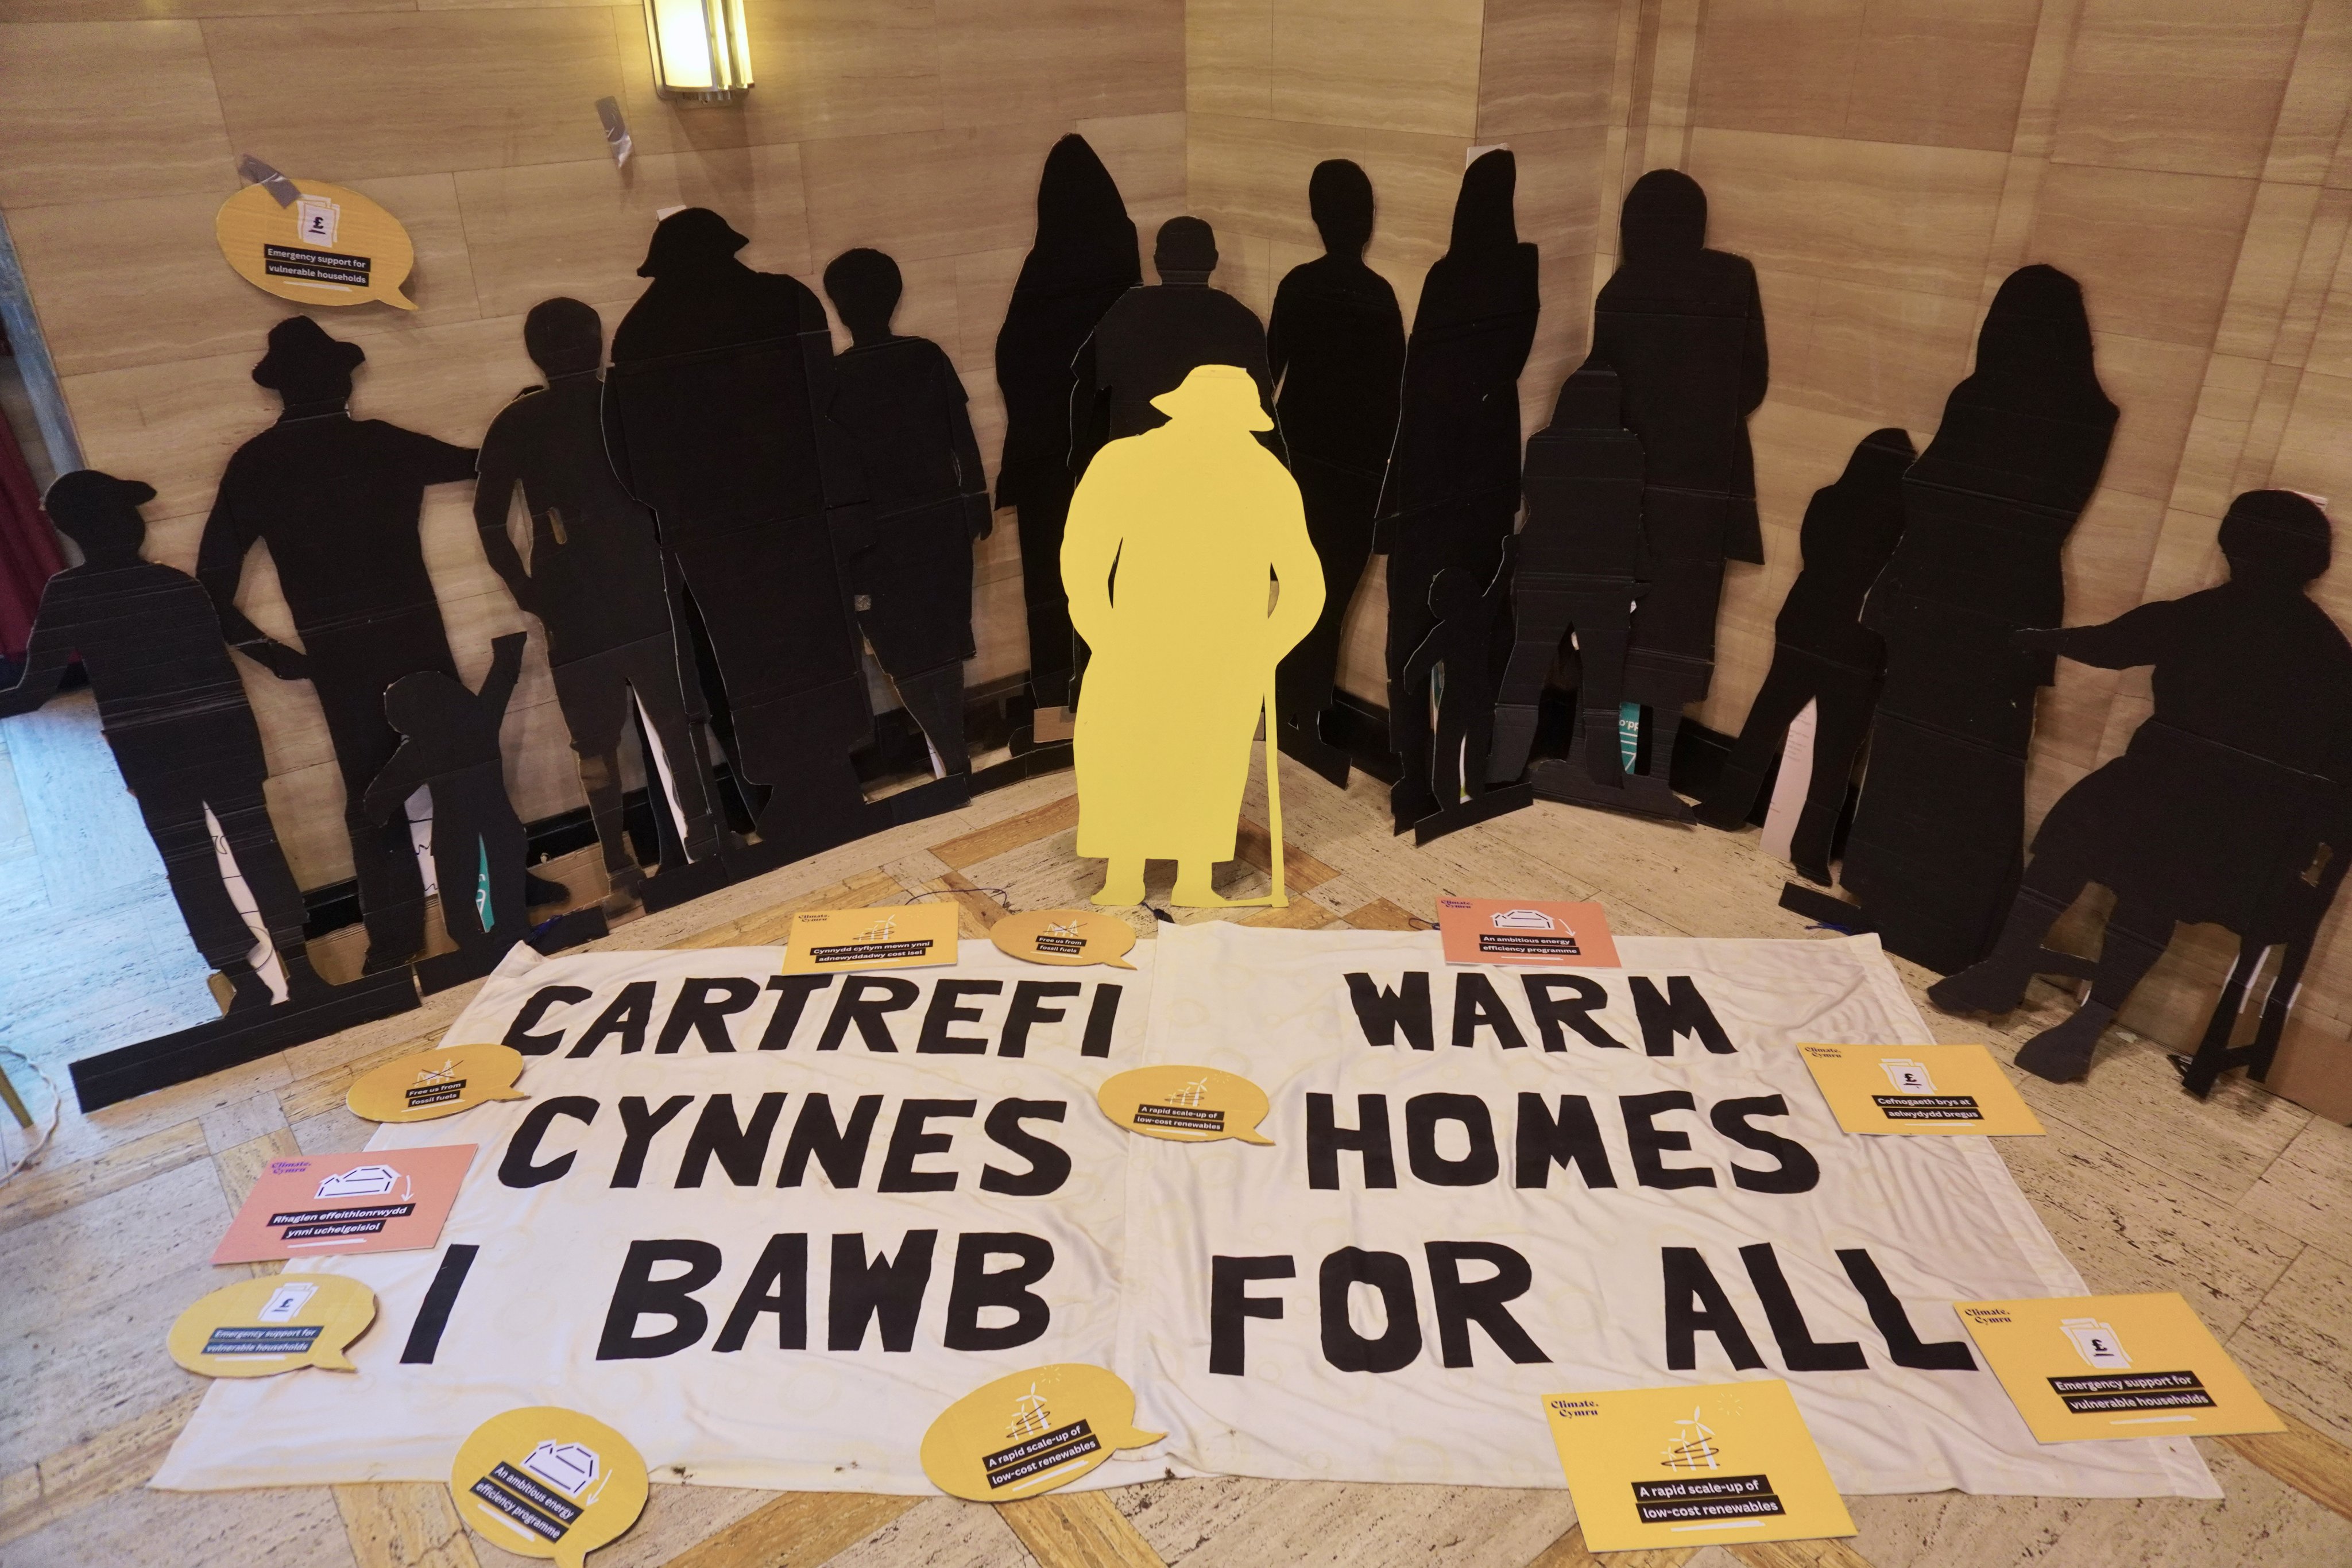 Life-sized back silhouettes behind a banner, 'warm homes for all'